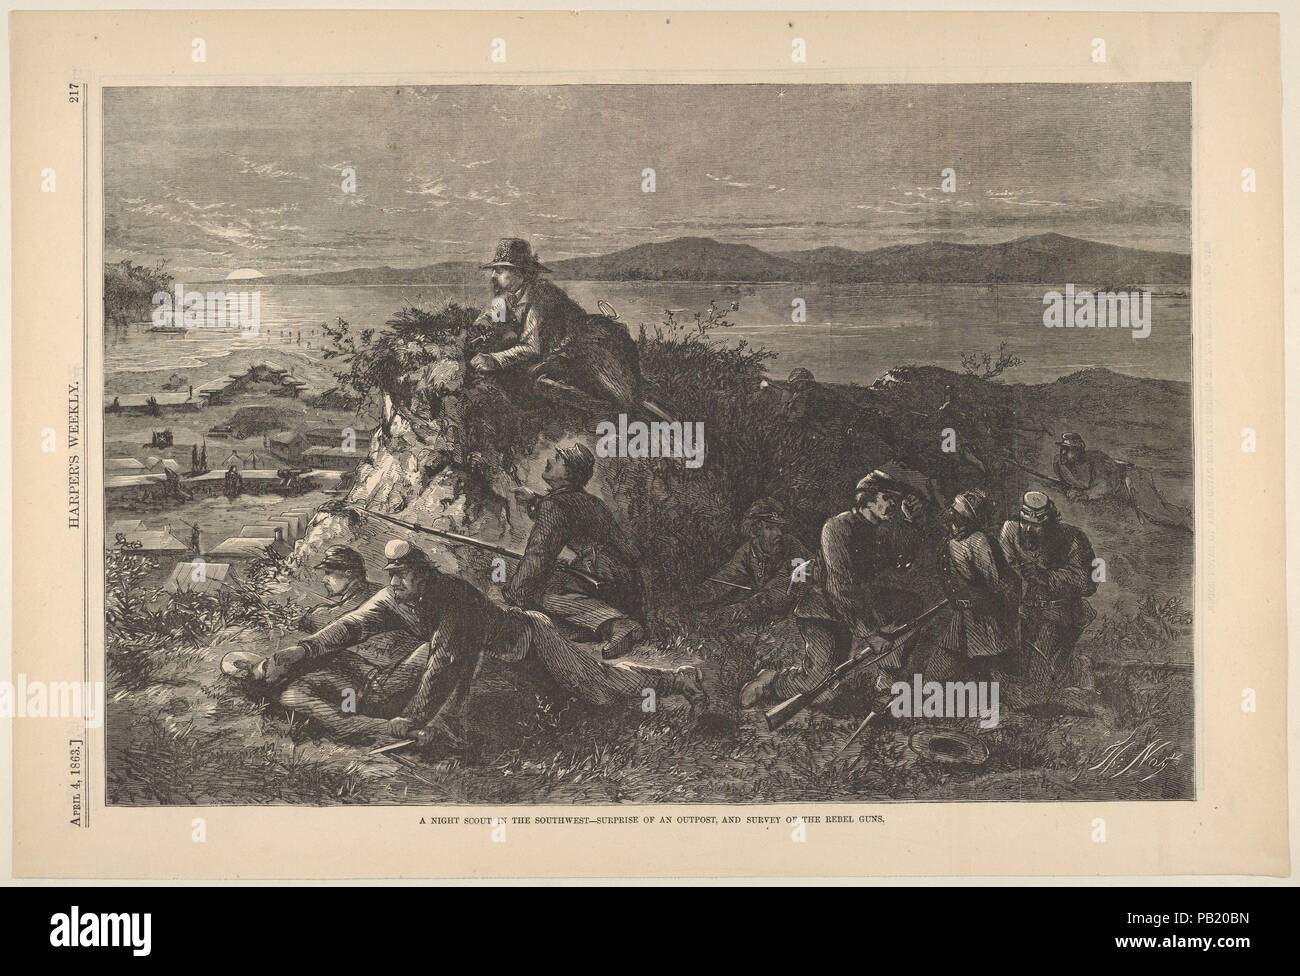 A Night Scout in the Southwest - Surprise of an Outpost, and Survey of the Rebel Guns (from Harper's Weekly). Artist: Thomas Nast (American (born Germany), Landau 1840-1902 Guayaquil). Dimensions: Sheet: 10 7/8 × 16 in. (27.7 × 40.7 cm). Publisher: Harper's Weekly (American, 1857-1916). Date: April 4, 1863.  Union success on the Civil War's western front depended upon gaining control of the Mississippi and Ulysses S. Grant waged a series of campaigns to achieve this goal between 1861 and 1863. Published in Harper's Weekly in April 1863, this wood engraving depicts Union scouts overpowering Con Stock Photo